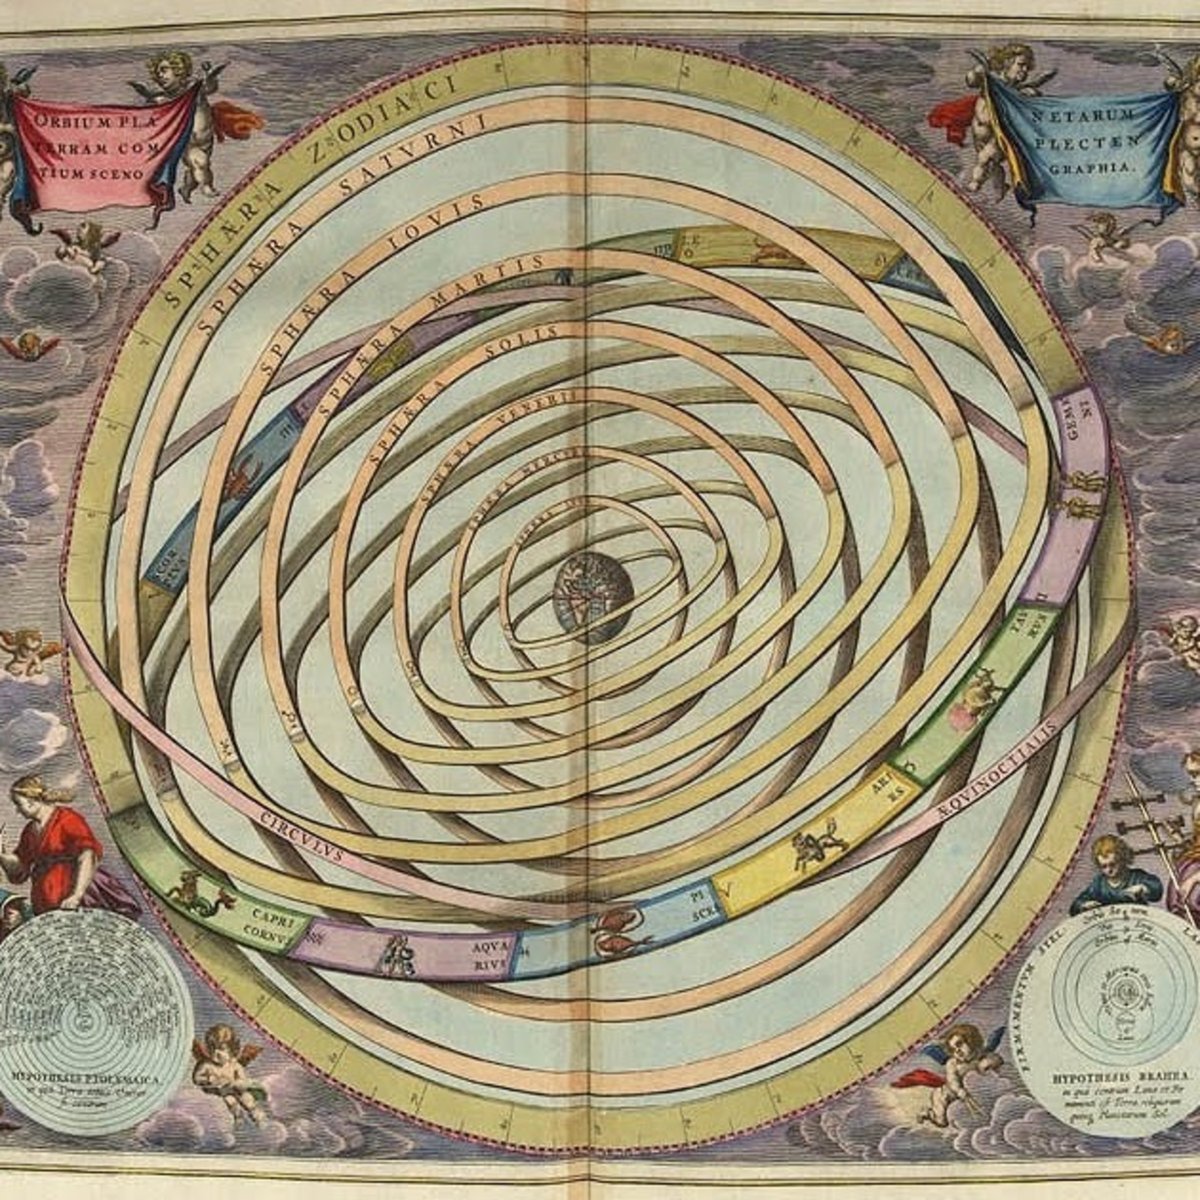 THREAD. Problems depicting HEAVEN # 2: Hierarchical Levels.We might think of heaven as a place of equality, but St.Paul believed it had 3 levels. By the 2nd century many Christians believed there were 7 levels of heaven & by the middle ages it became 10 heavens of Dante Aligheri